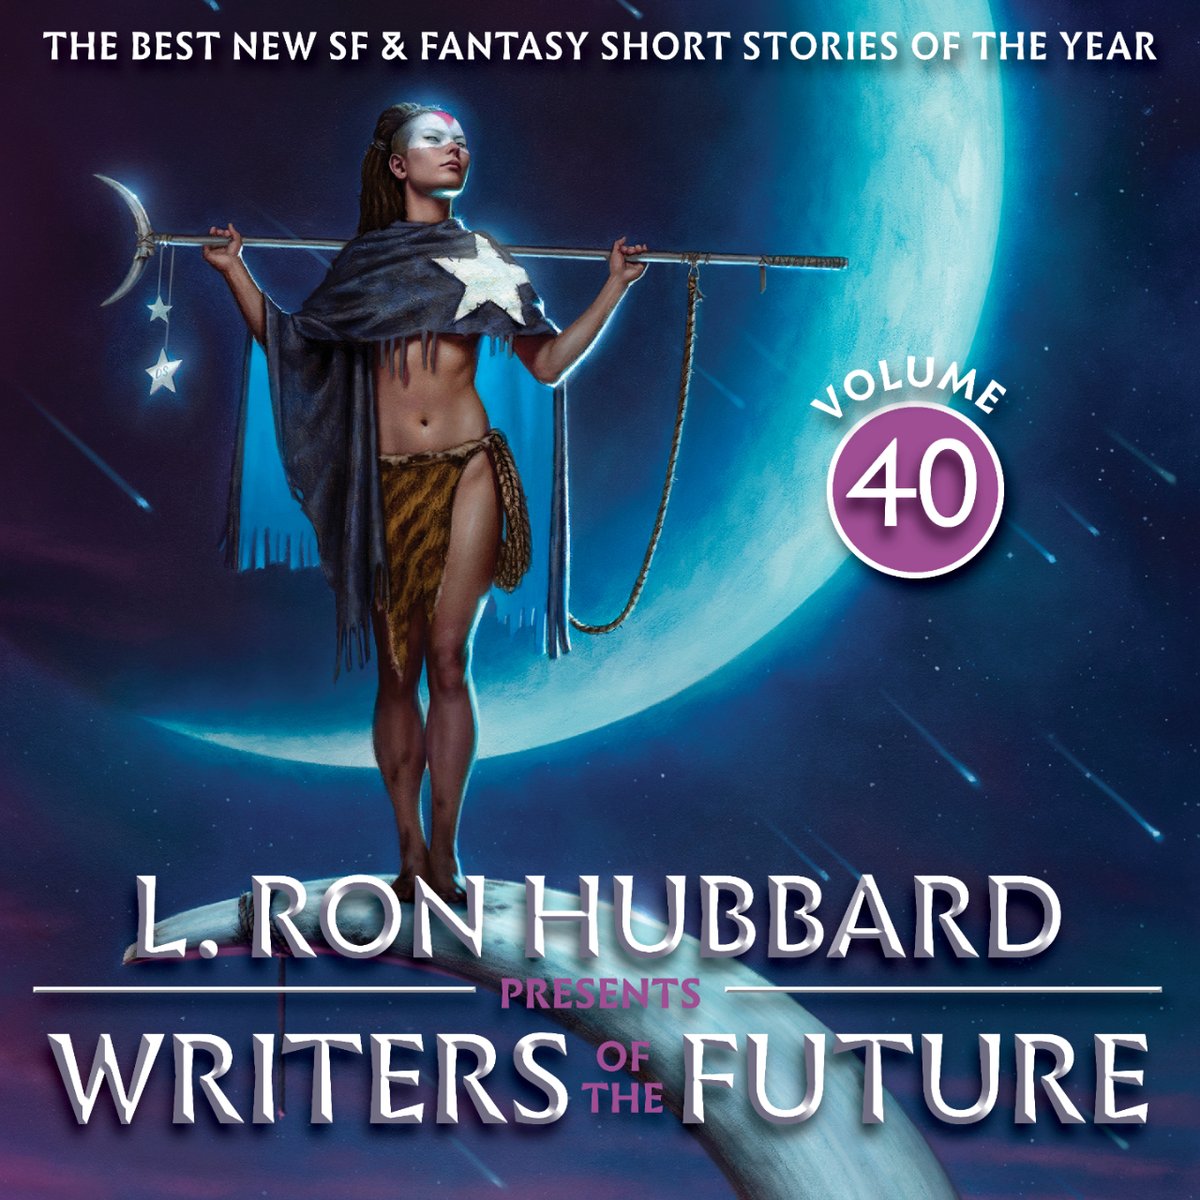 New Audiobook release at bit.ly/WOTF40info 

#LRonHubbard Presents #WritersOfTheFuture Volume 40, available nationwide at bit.ly/WOTF40stores. 

#WOTF40 #SpeculativeFiction #GalaxyPress #IllustratorsOfTheFuture #BookLaunch